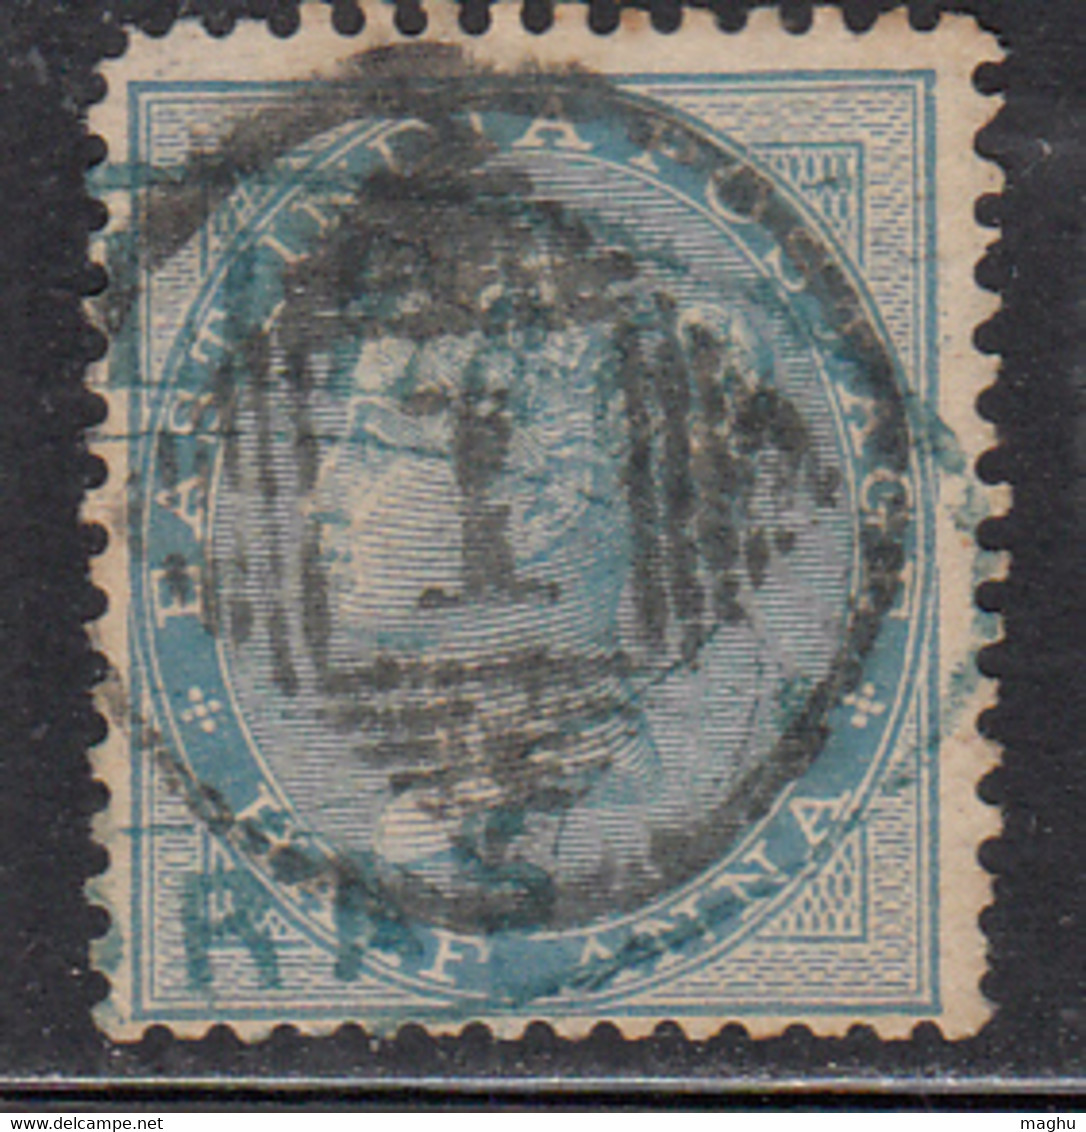 '1' Madras Distict, Madras Circle/ Cooper / Renouf Type 9a, British East India Used, Early Indian Cancellations - 1854 Britische Indien-Kompanie